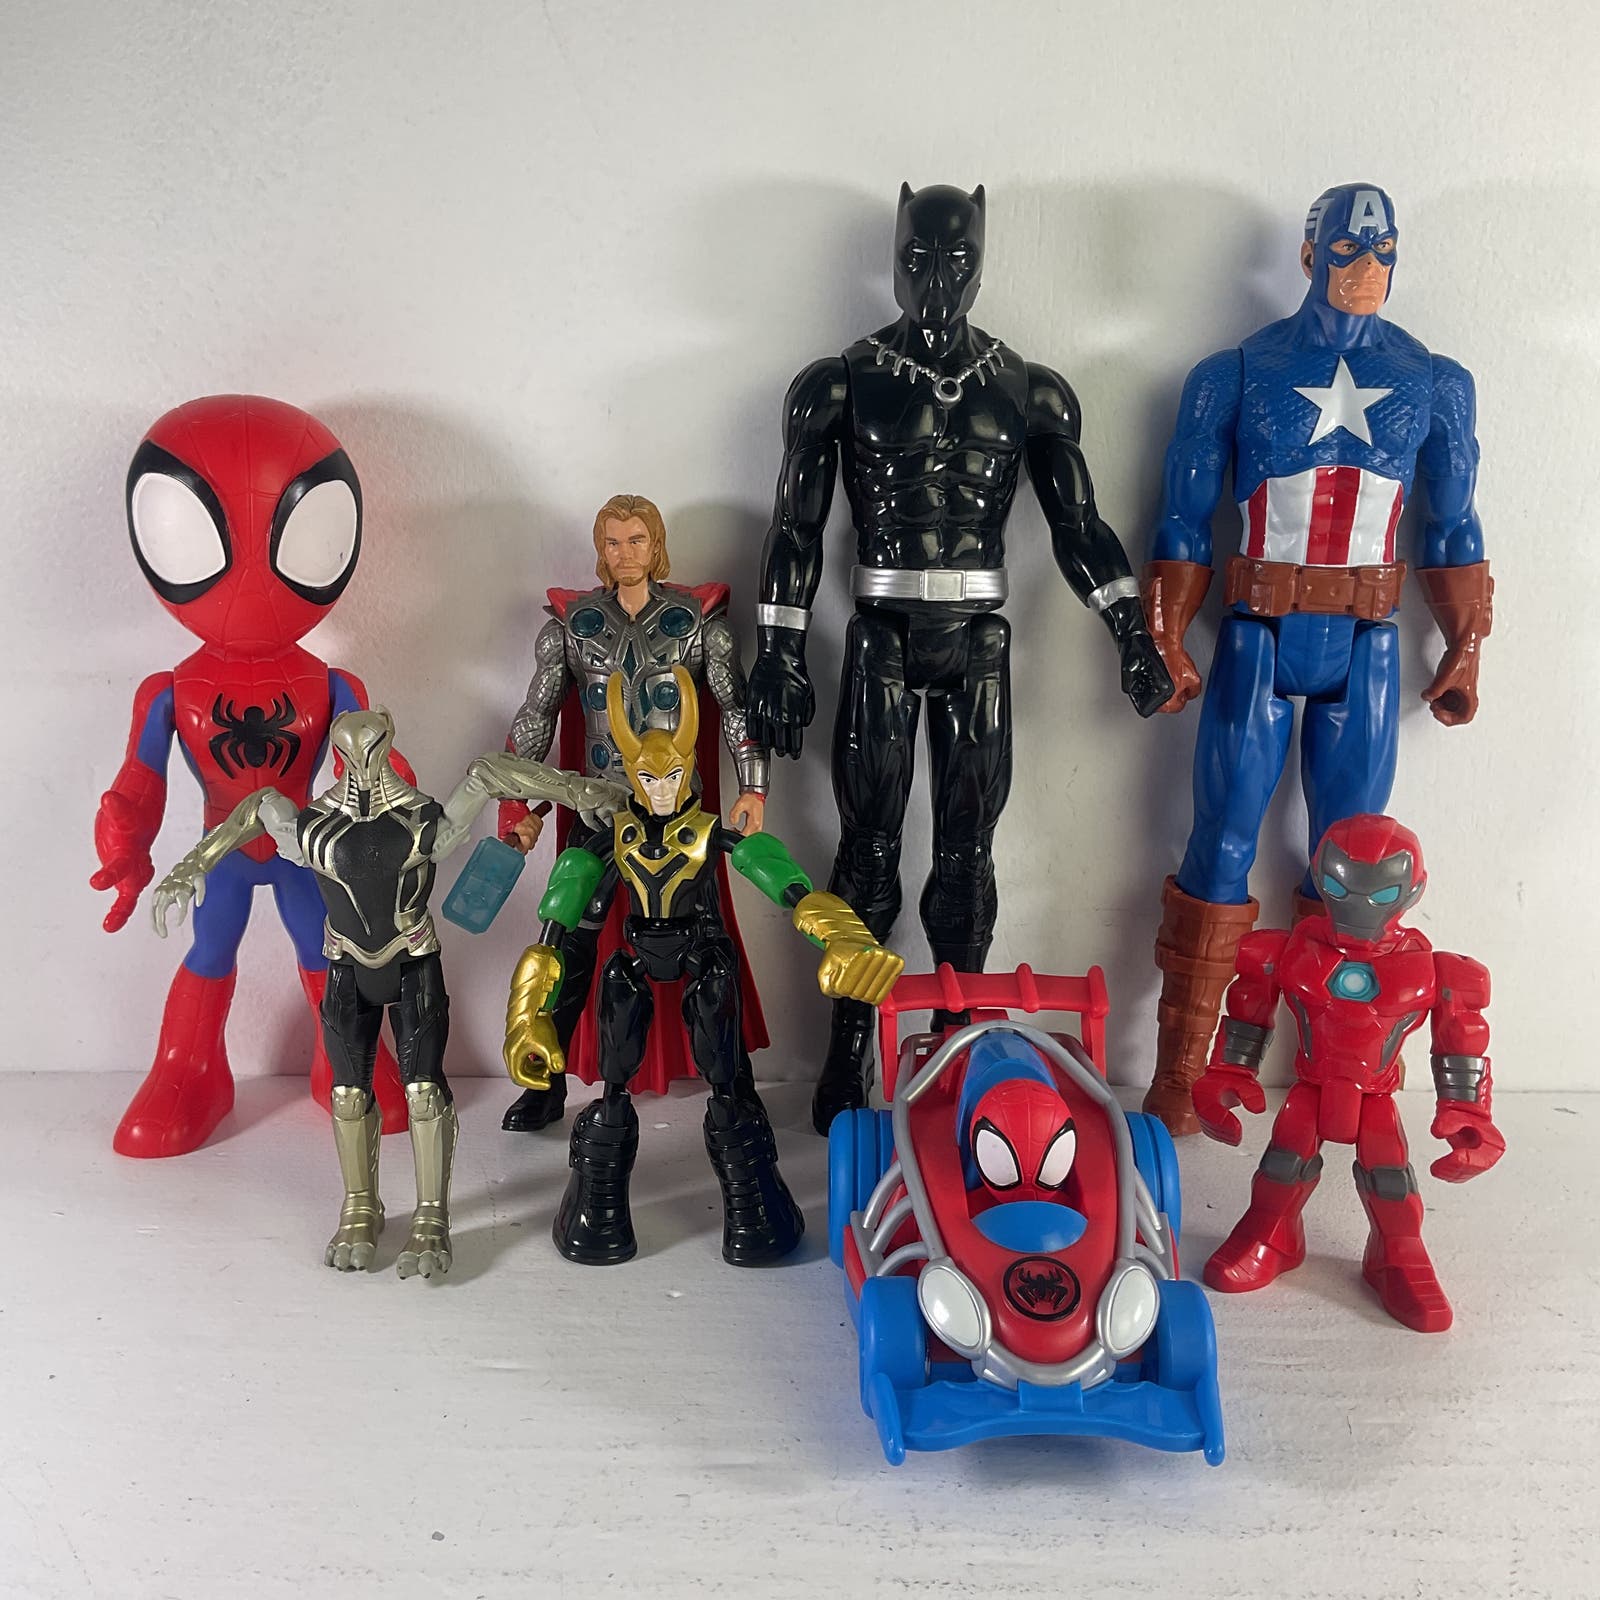 Mixed Used LOT 7 lbs Hasbro Marvel Mixed Action Figures Spiderman Black Panther - Warehouse Toys